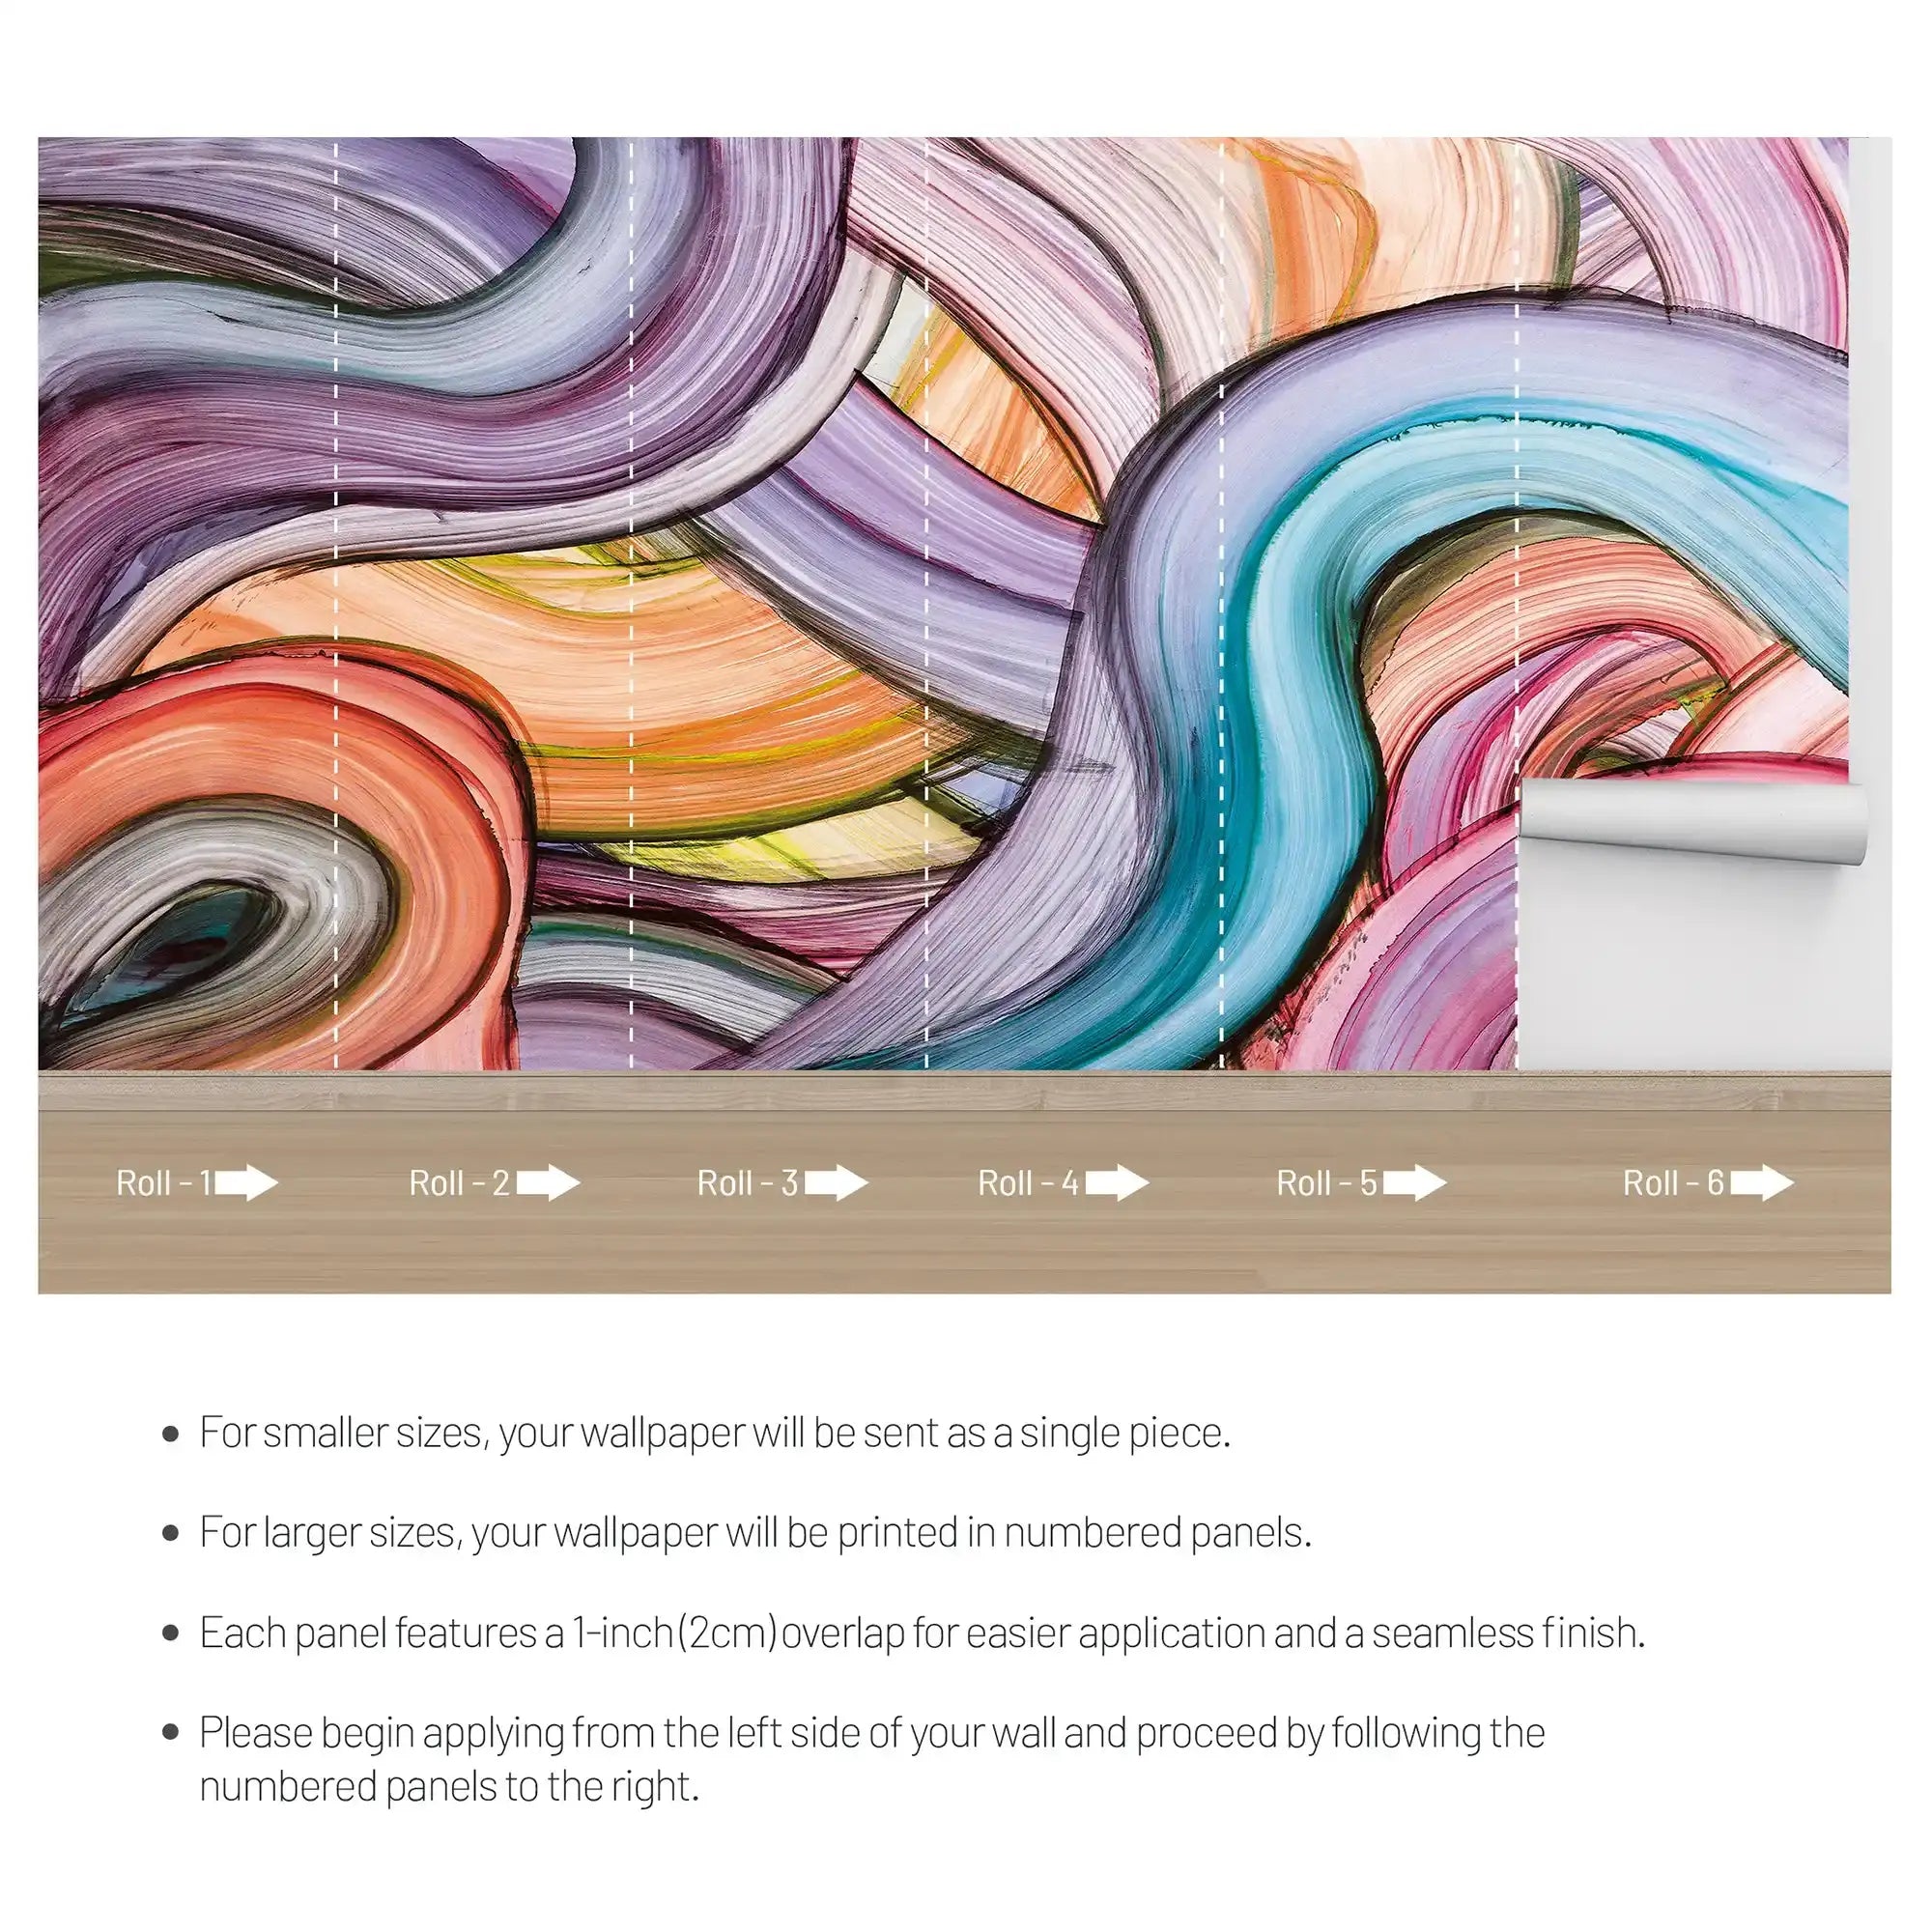 3092-A / Peelable Stickable Wallpaper with Colorful Wavy Lines - Bold, Contemporary Geometric Design for Any Room - Artevella